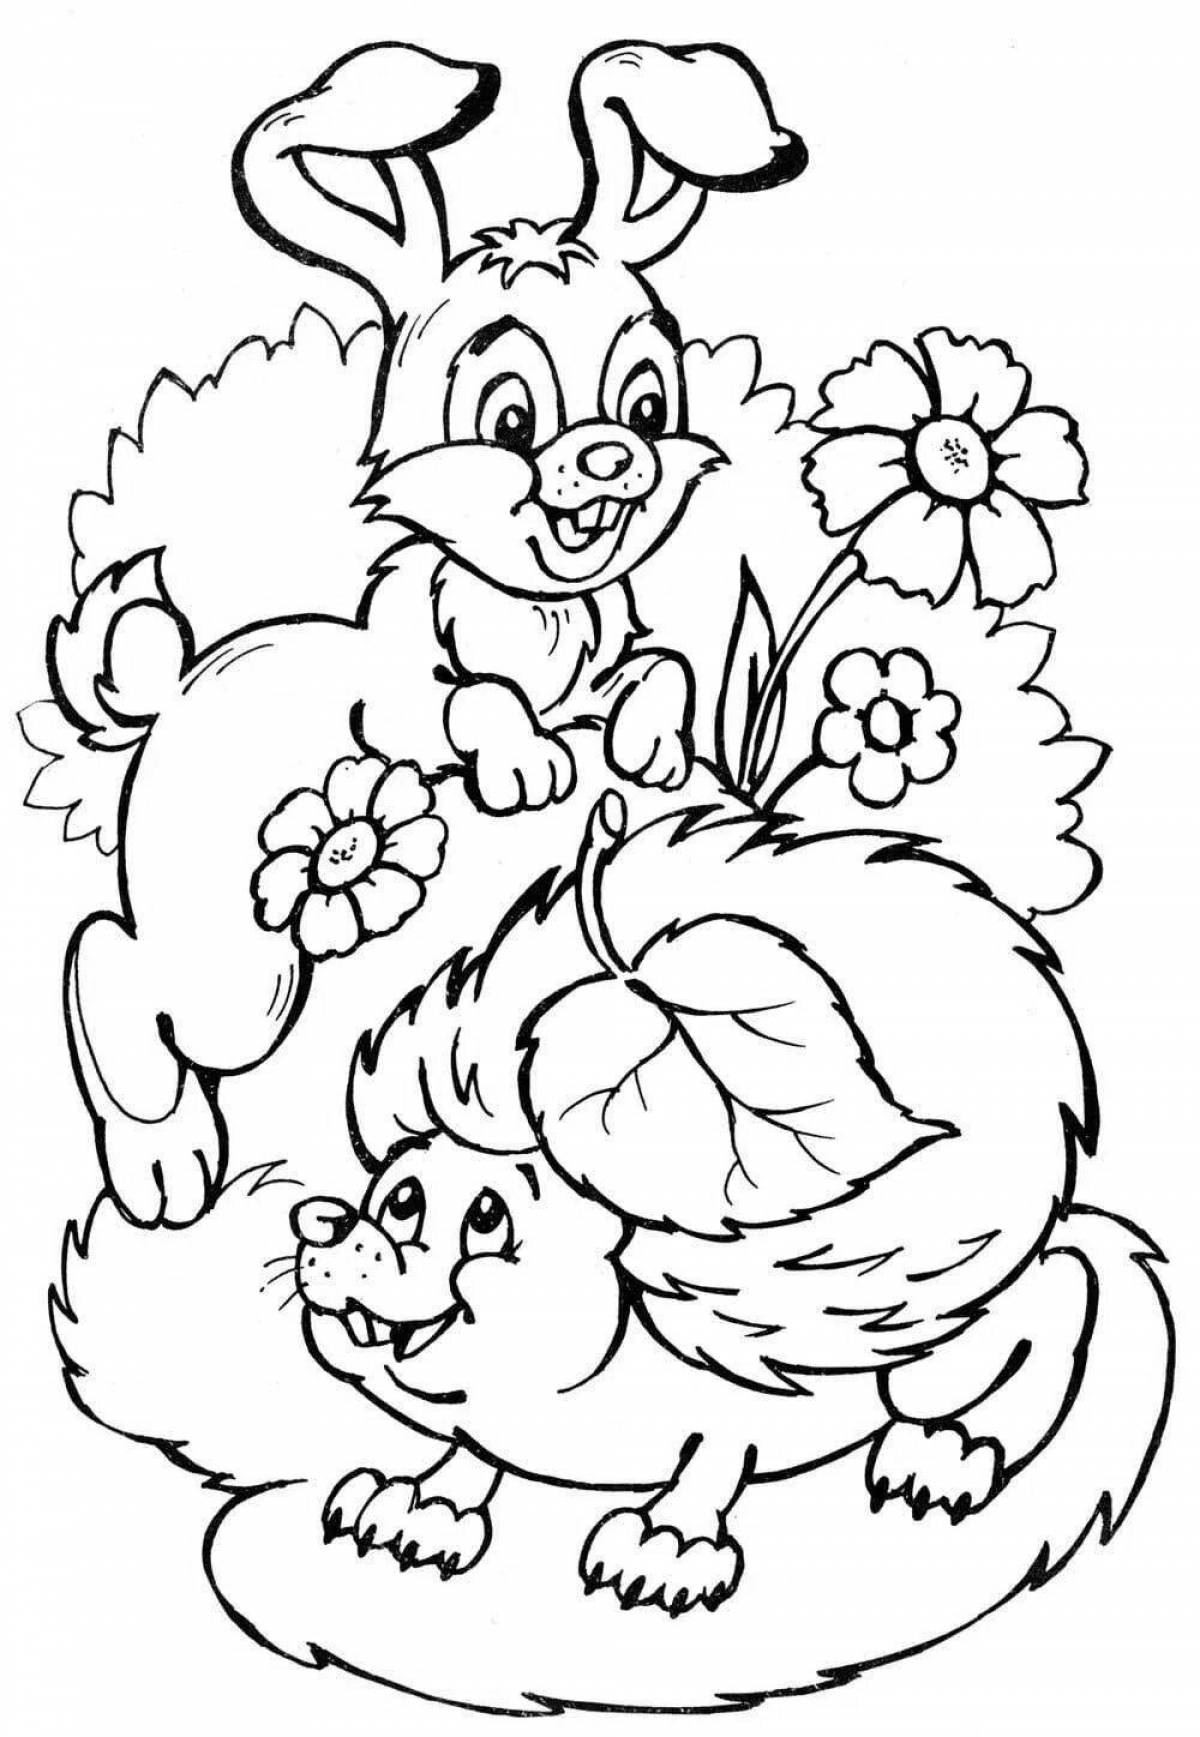 Adorable hare and squirrel coloring book